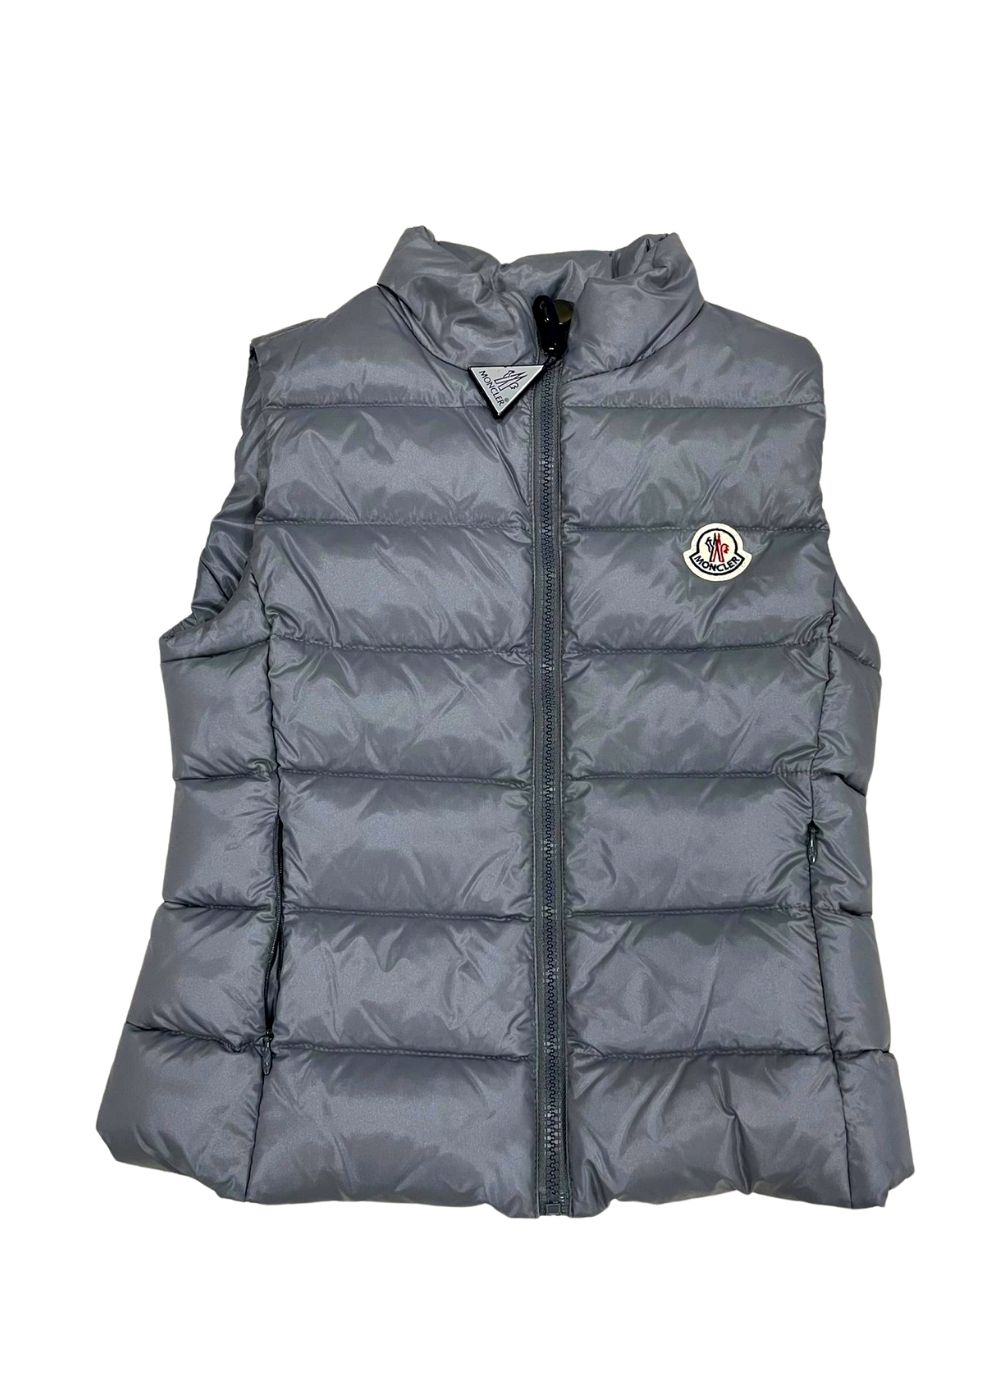 Featured image for “MONCLER GHANY GRIGIO”